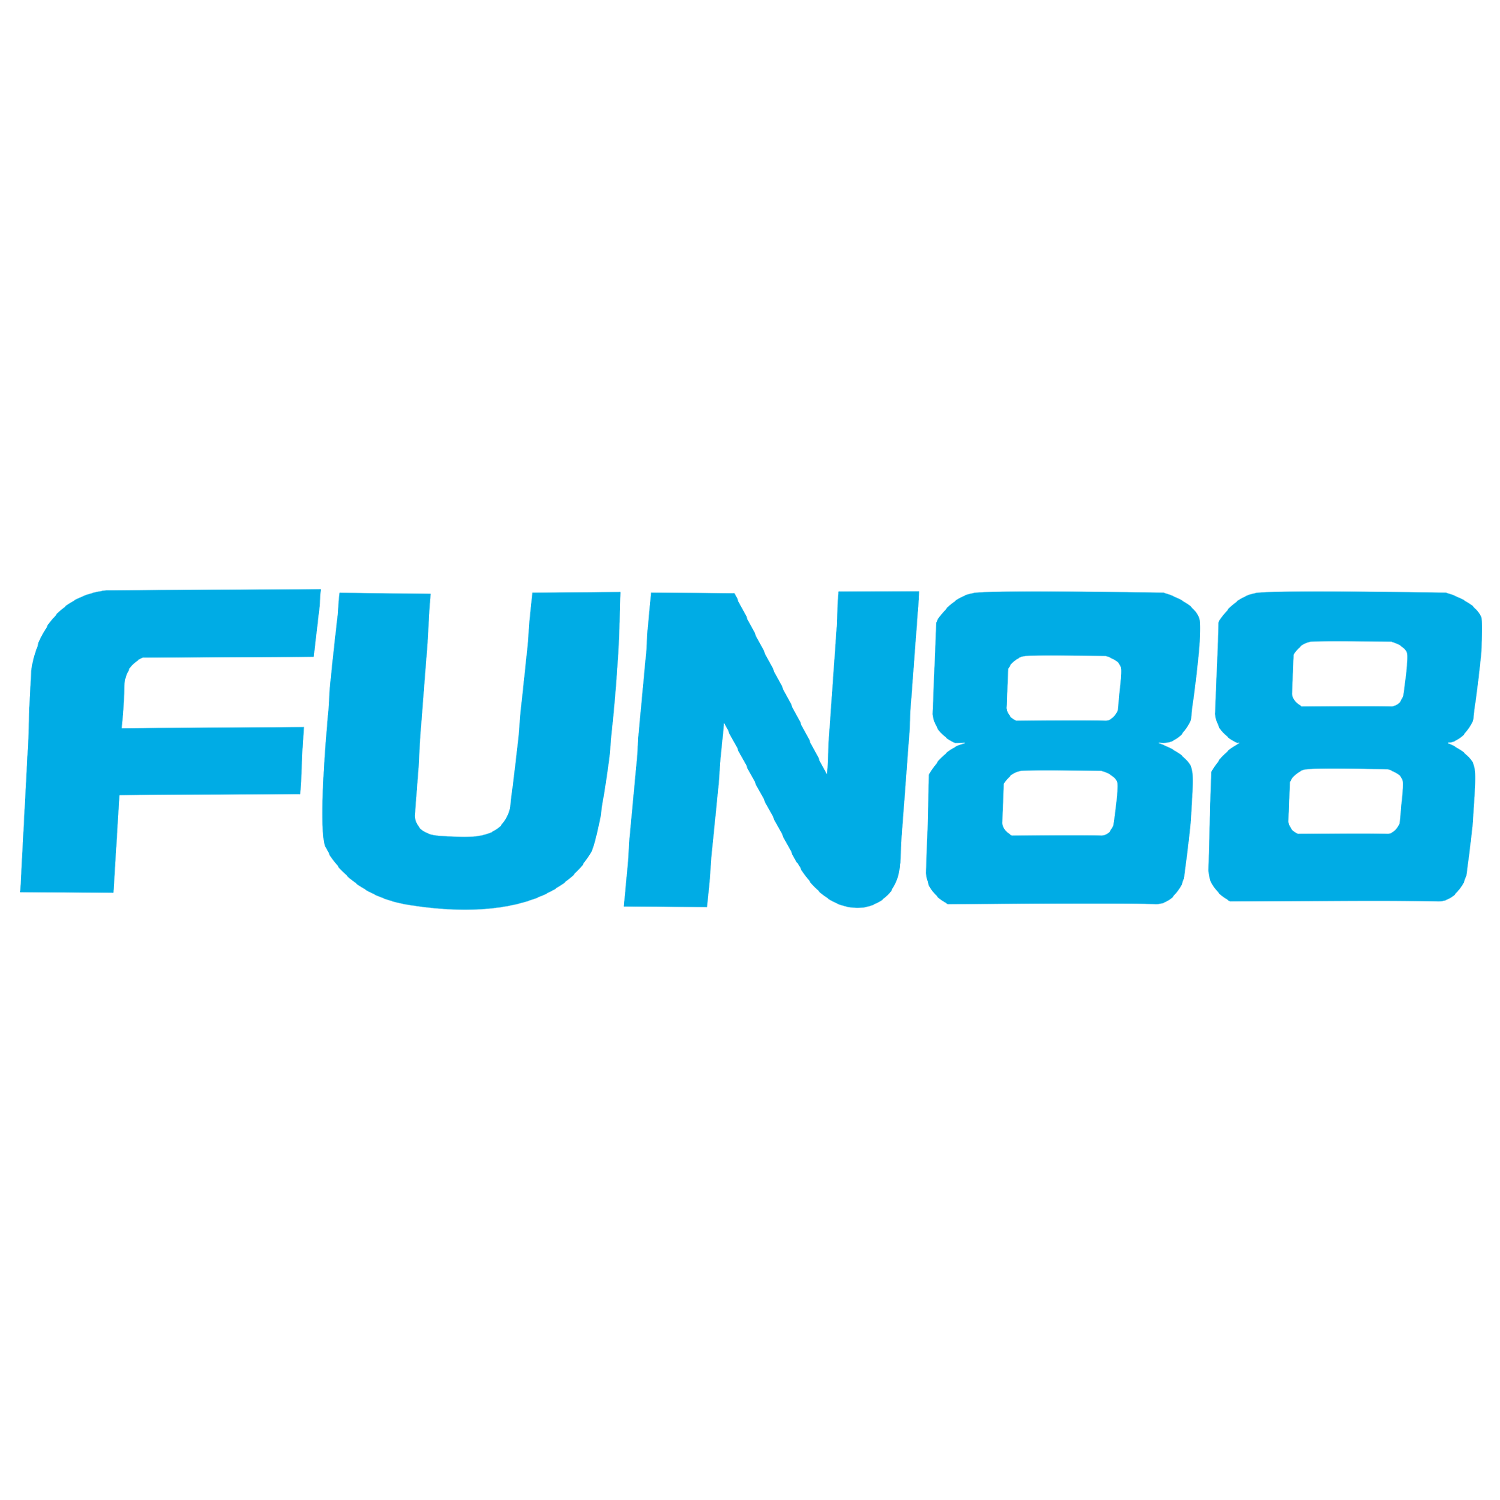 Fun88 is a young yet trustworthy betting company for pleasant gambling.